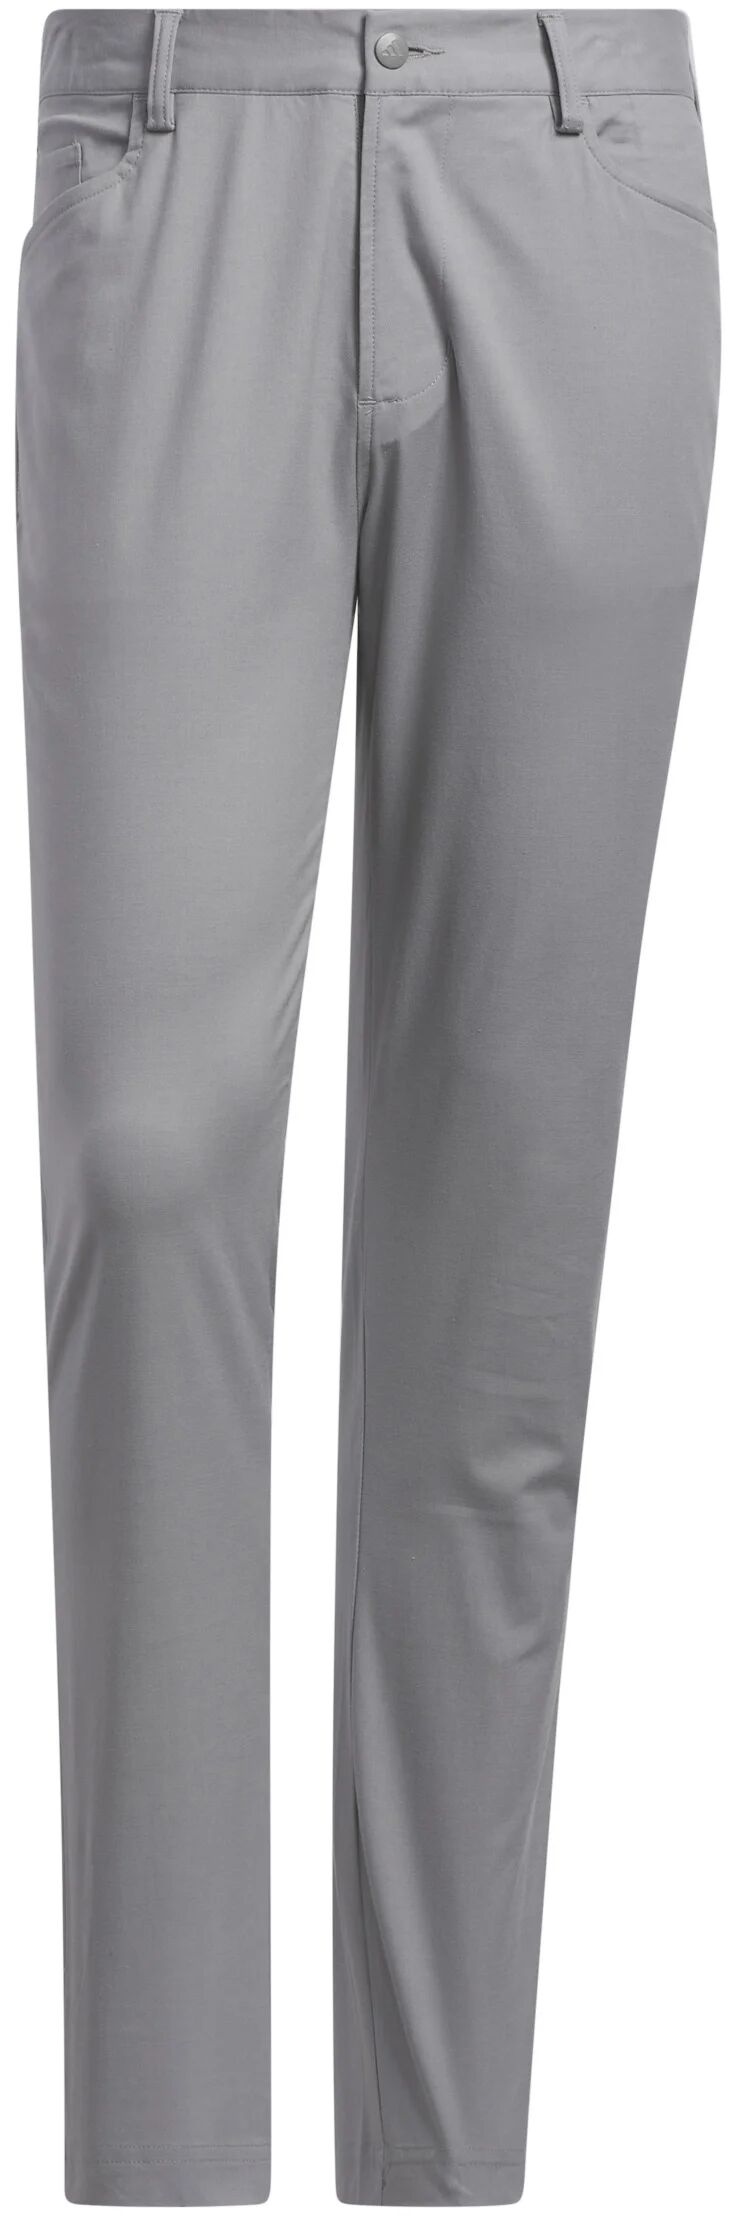 adidas Go-To Five-Pocket Tapered Fit Men's Golf Pants -  , Size: 33x32